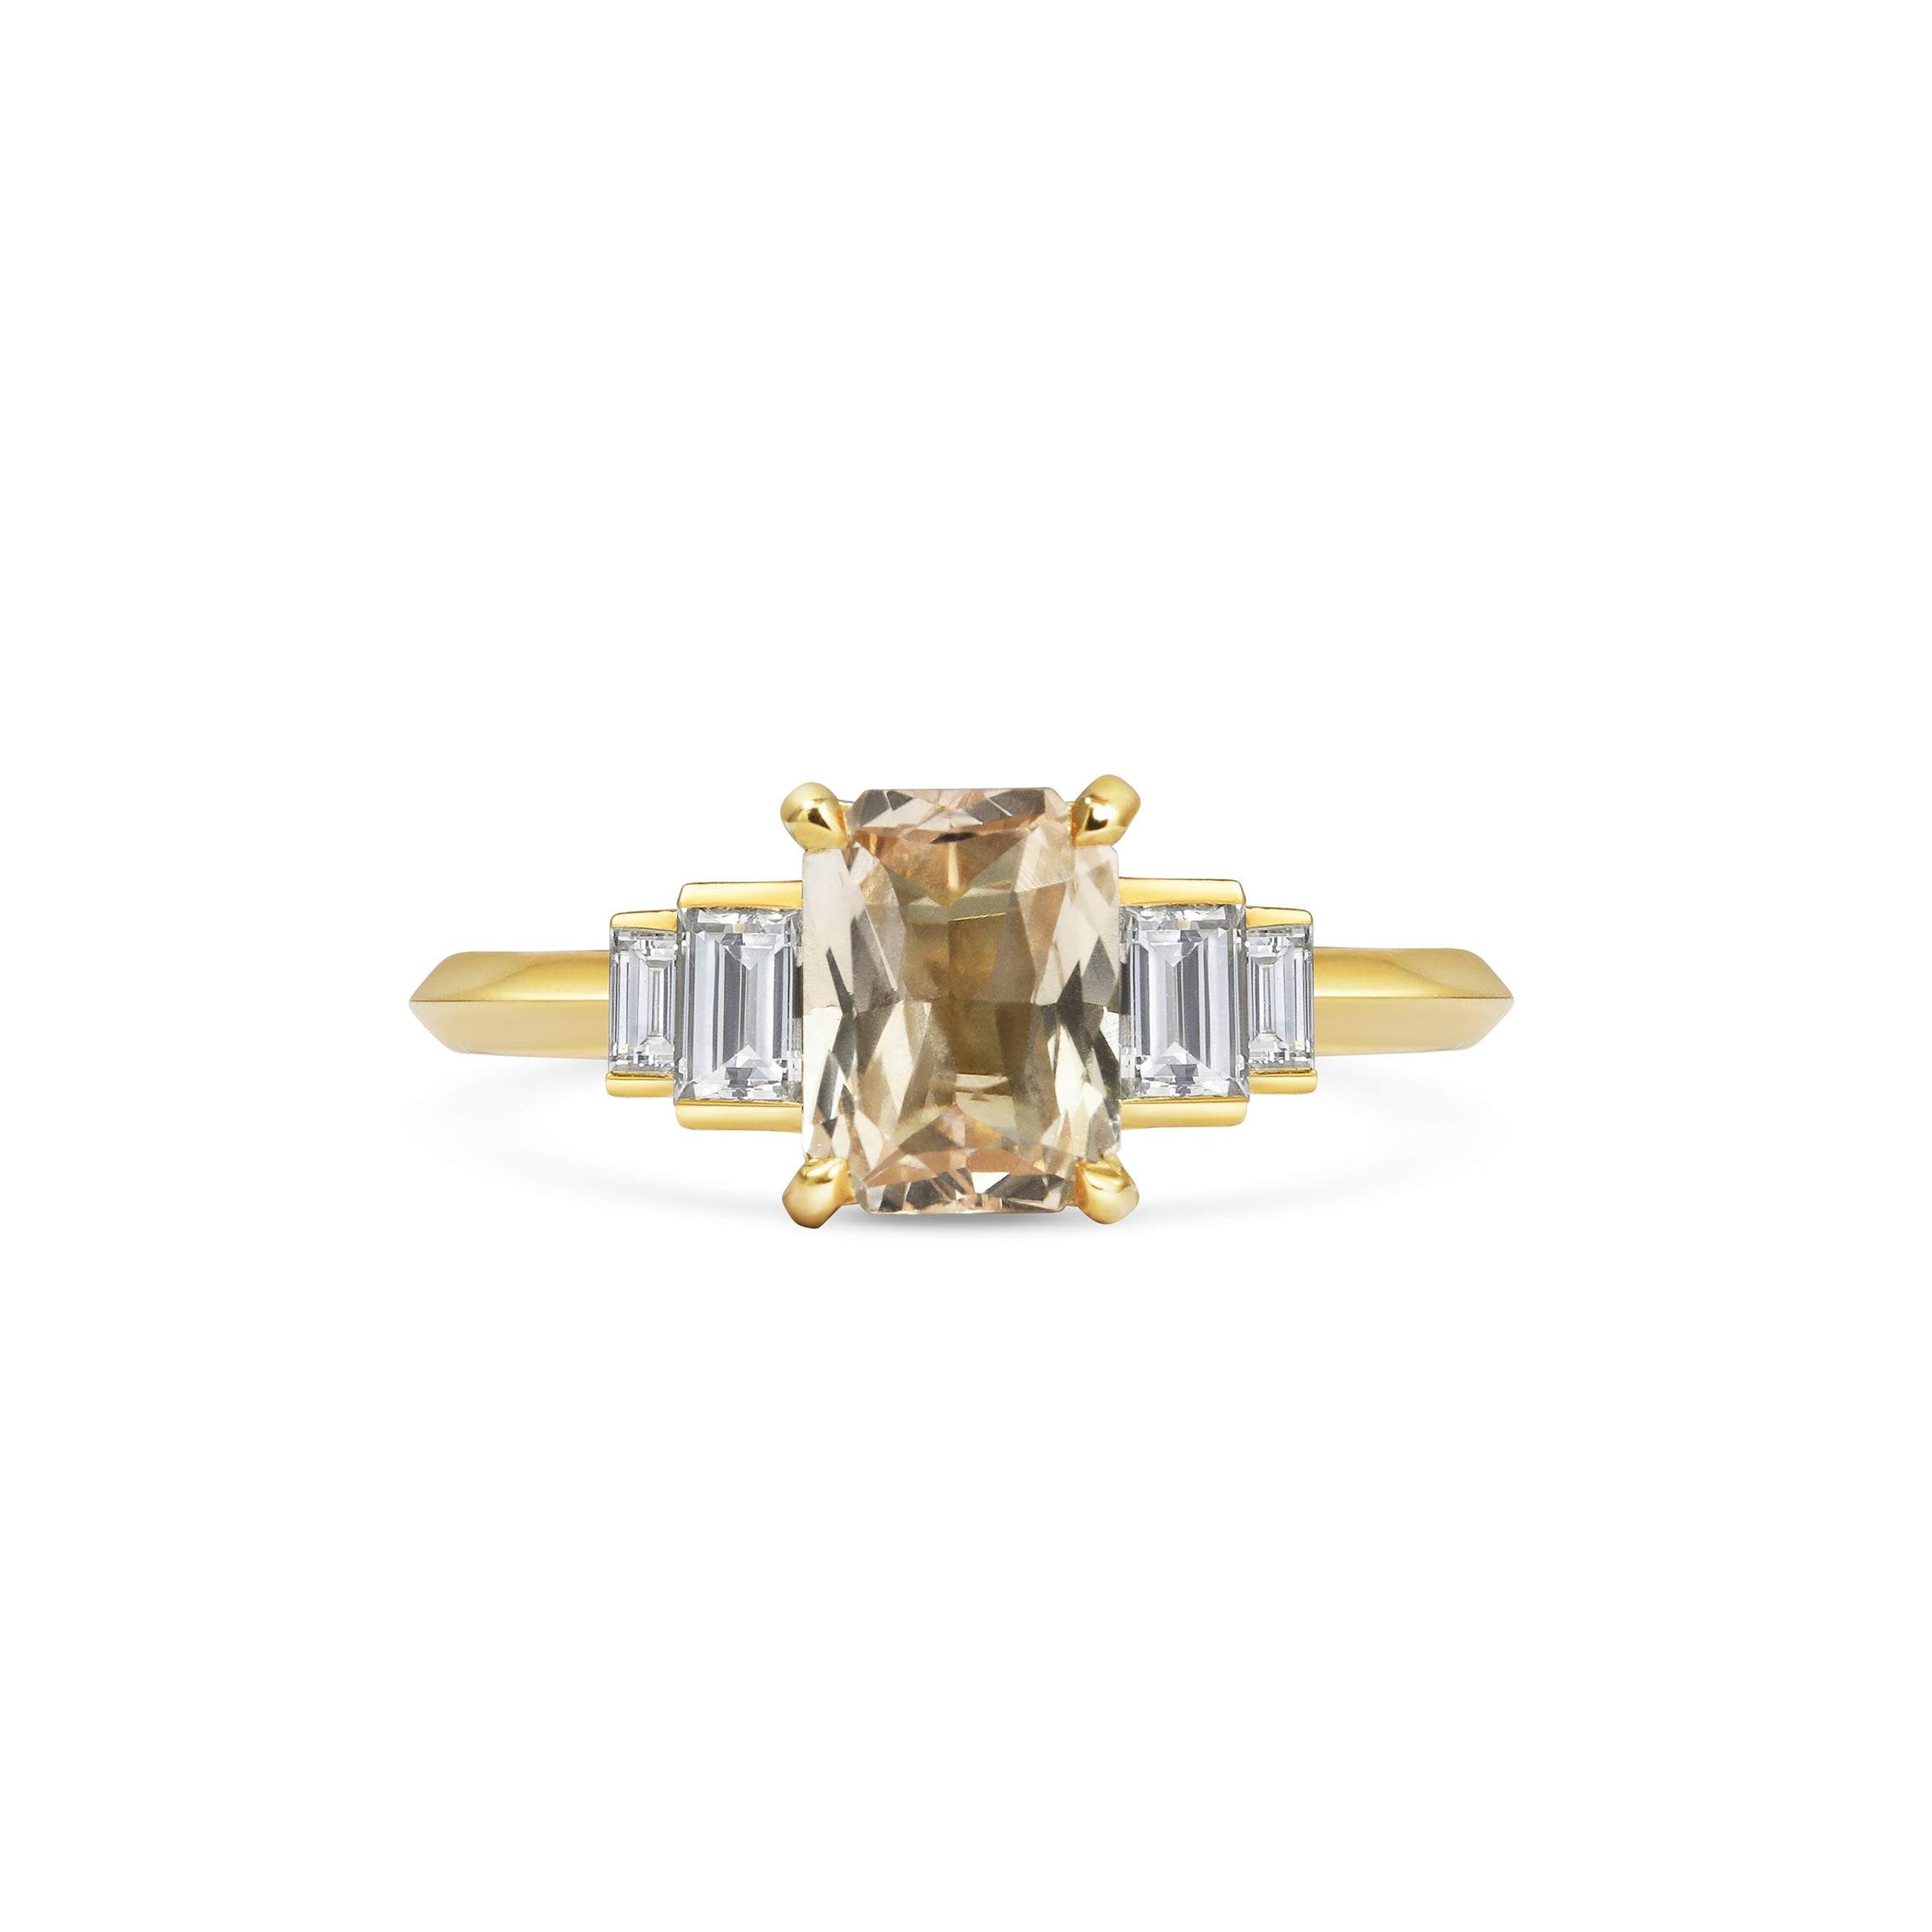 The Amacuro Ring by East London jeweller Rachel Boston | Discover our collections of unique and timeless engagement rings, wedding rings, and modern fine jewellery.